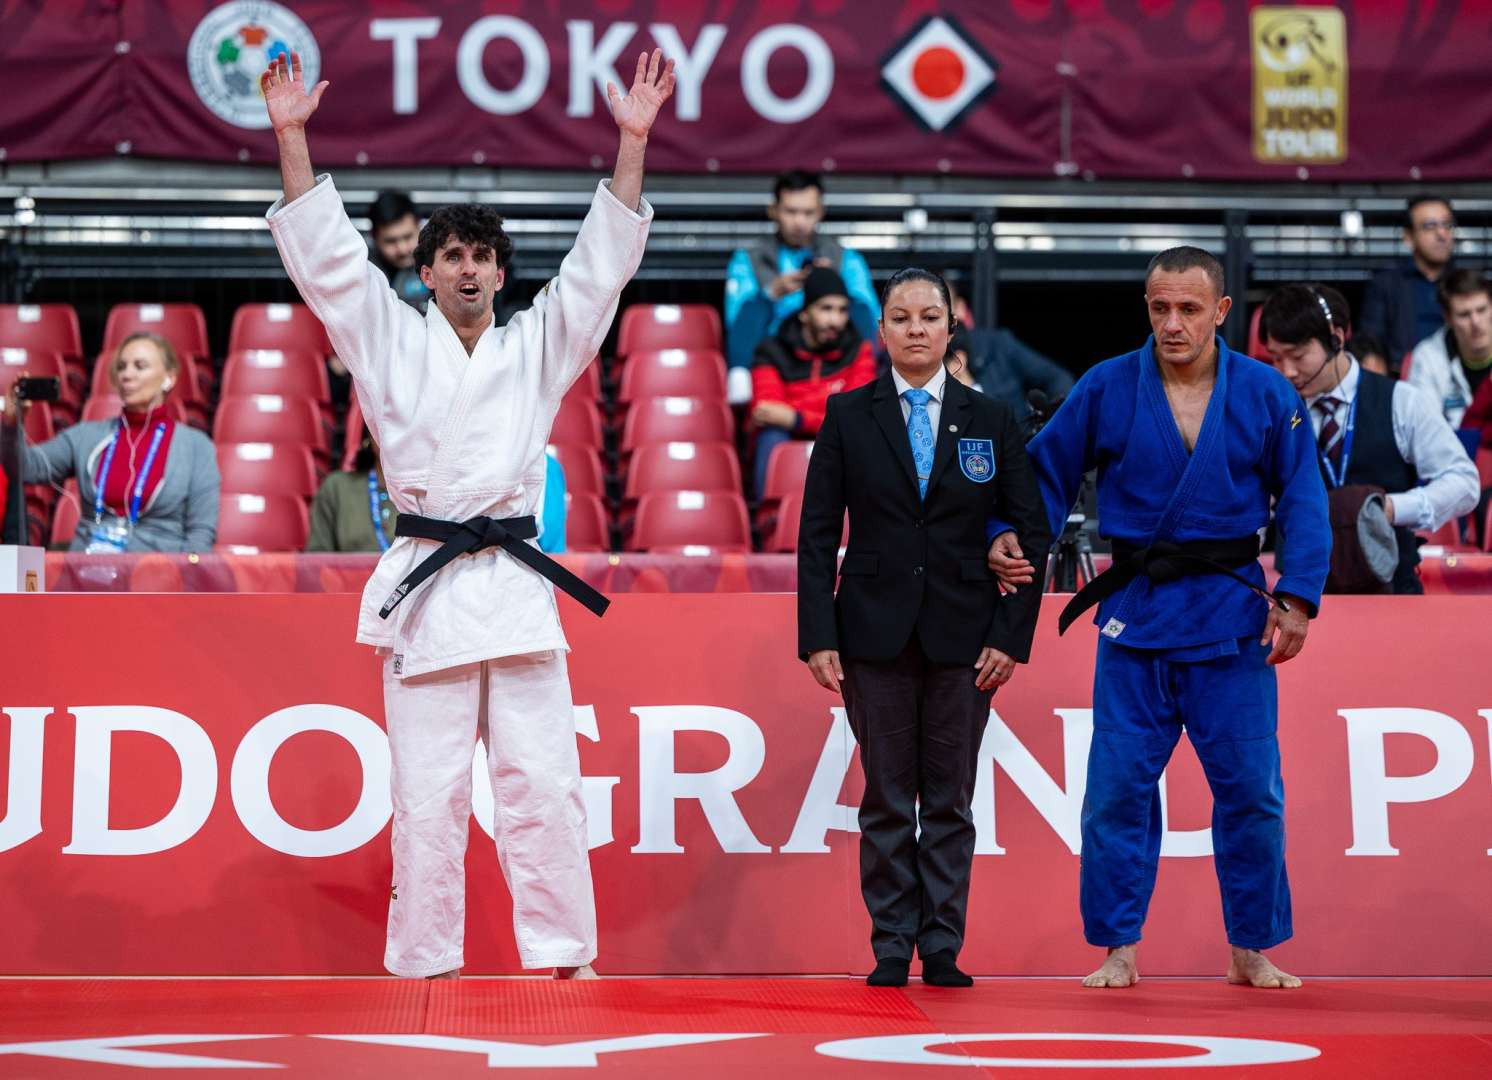 The show goes on in Tokyo at the IBSA Grand Prix